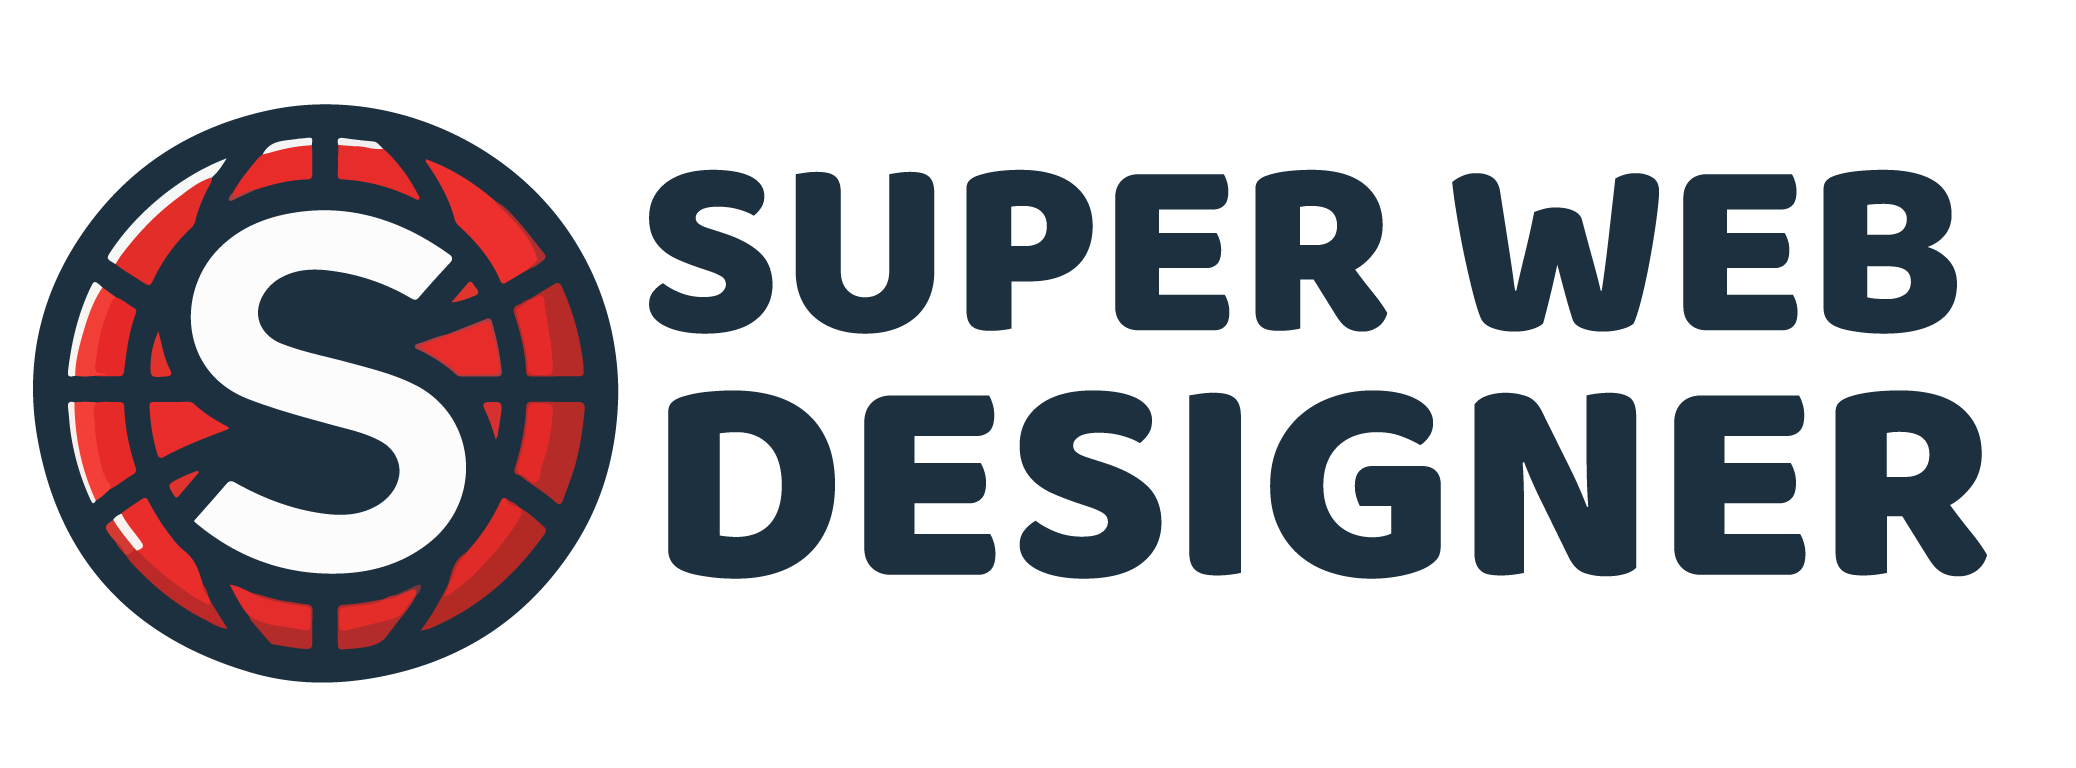 Elevate your online presence with Super Web Designer. We create visually stunning websites and effective digital marketing strategies to captivate your audience and drive impactful results. Join us for success online.